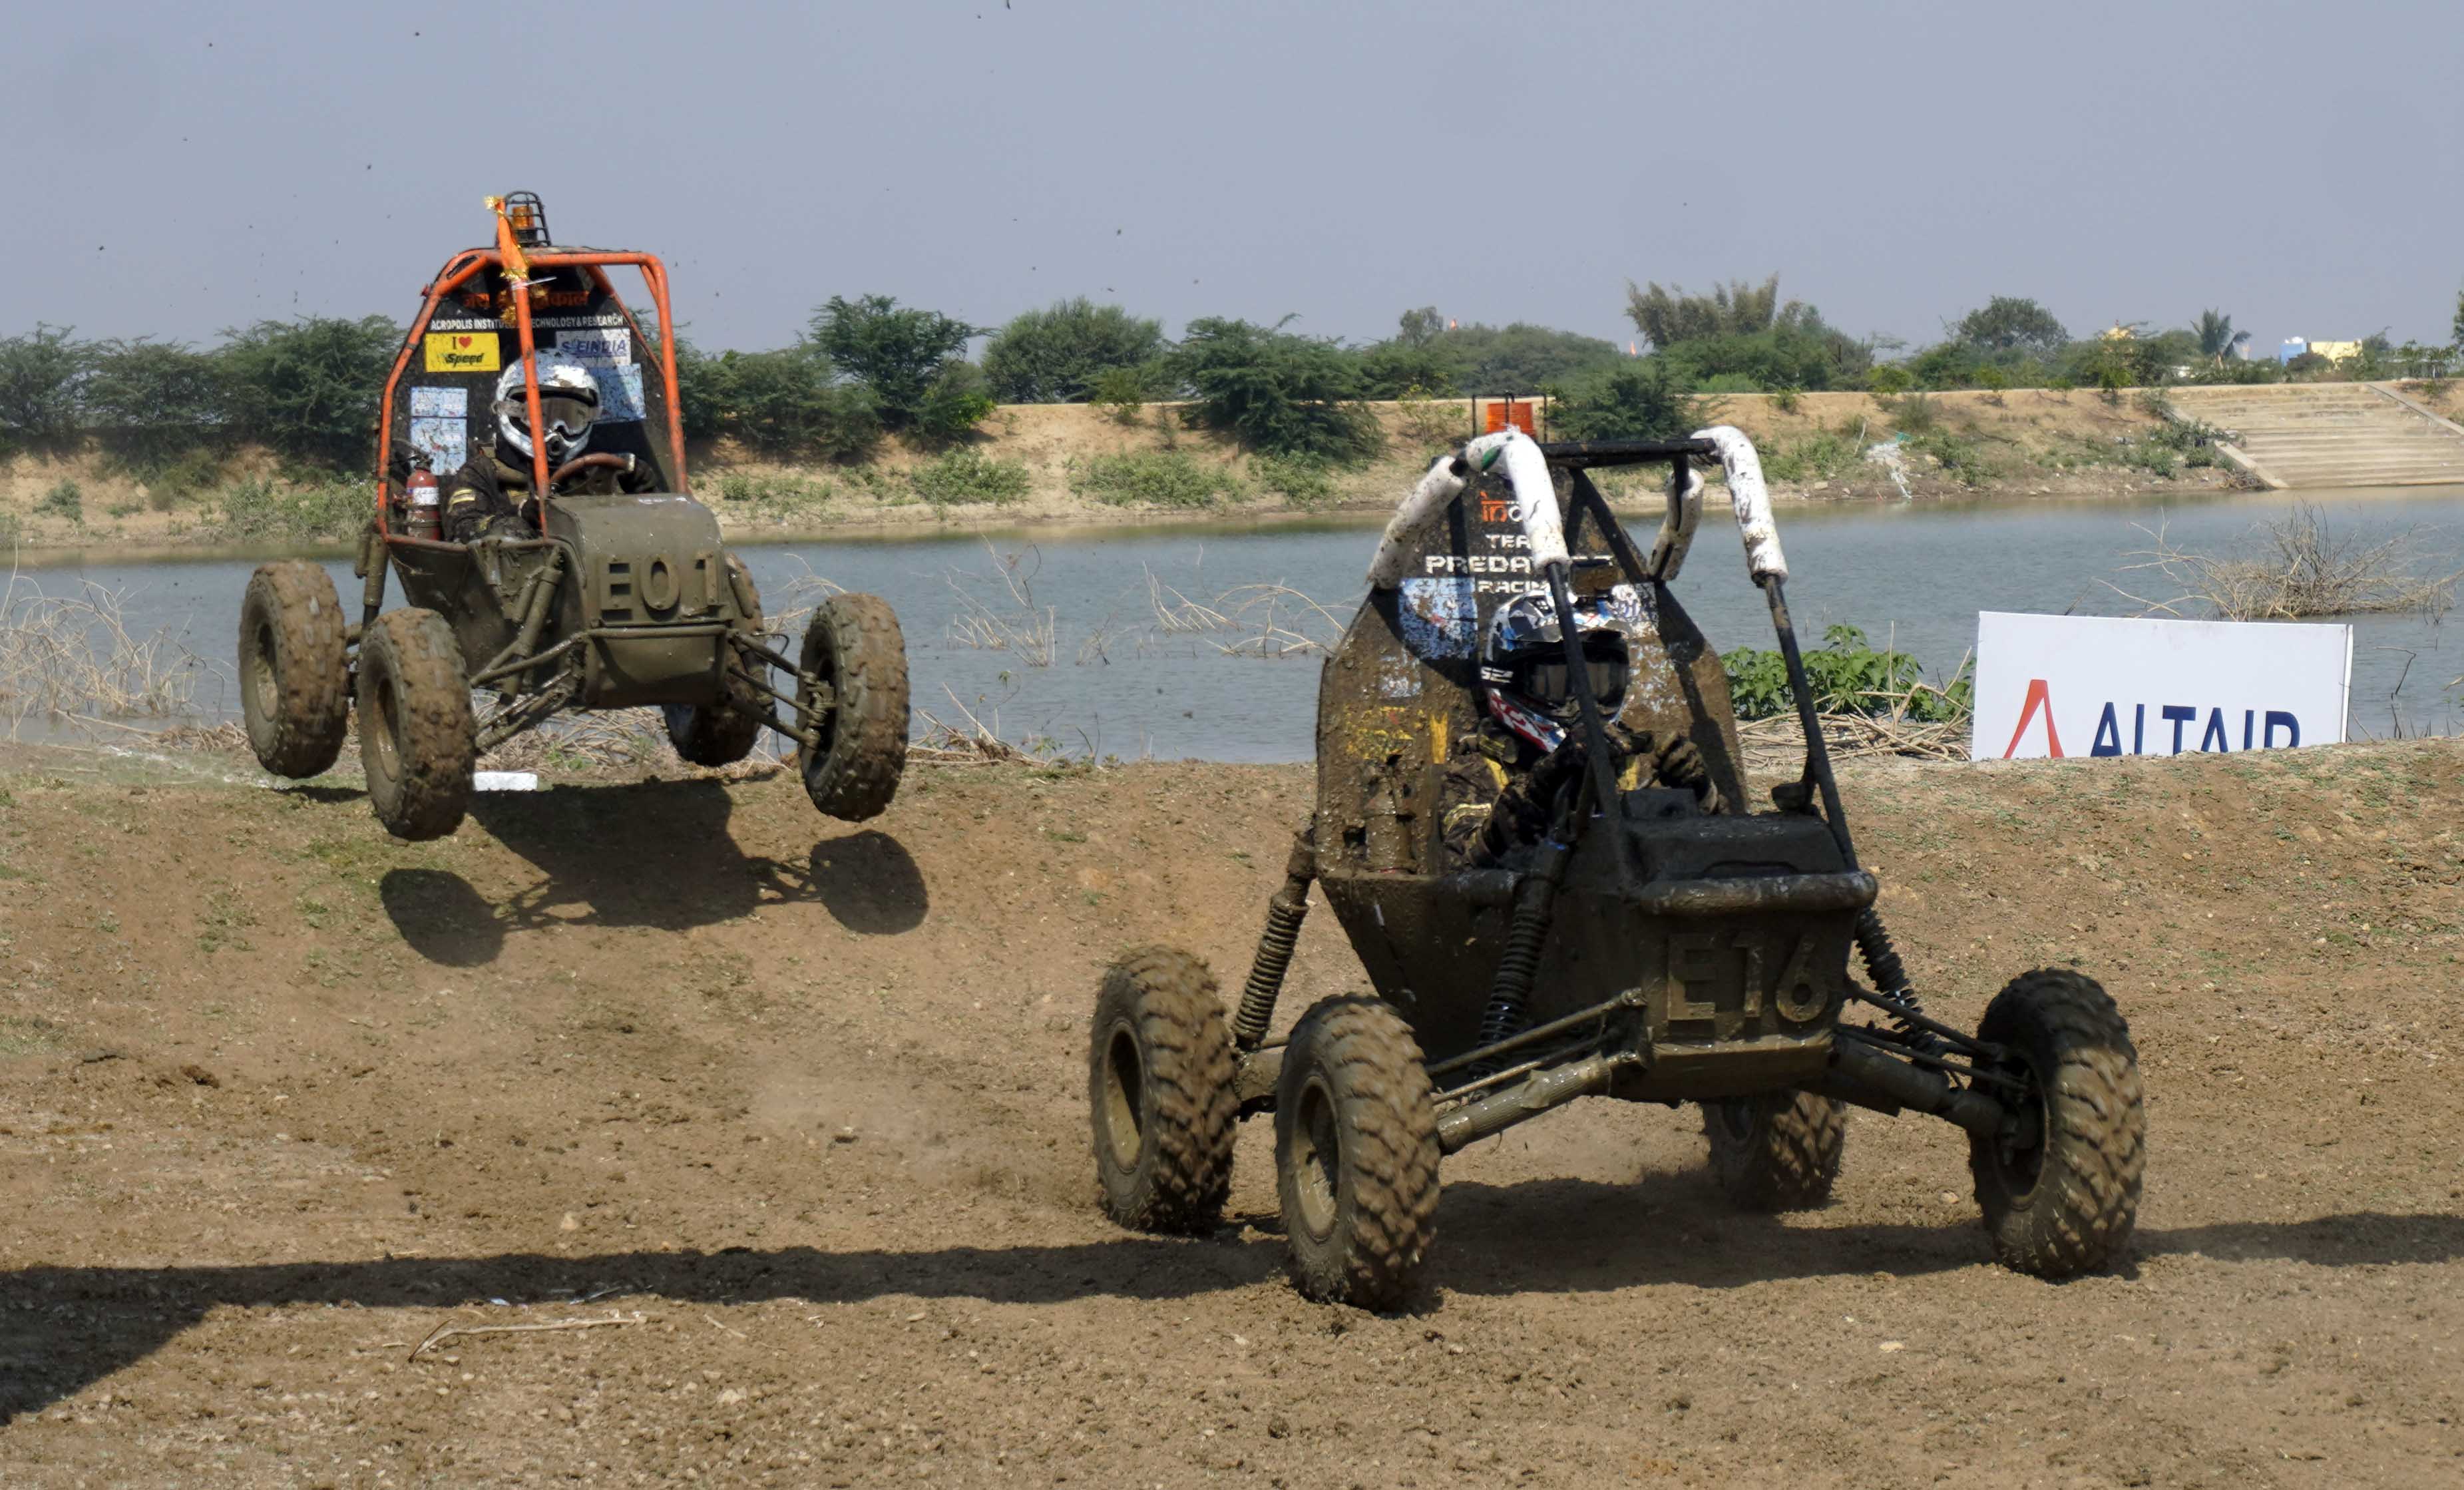 eBAJA SAEINDIA 2024 COMPETITION HELD. 47 ALL TERRAIN ELECTRIC BUGGIES BUILT BY ENGINEERING STUDENTS PARTICIPATED IN THE ENDURANCE TEST-03